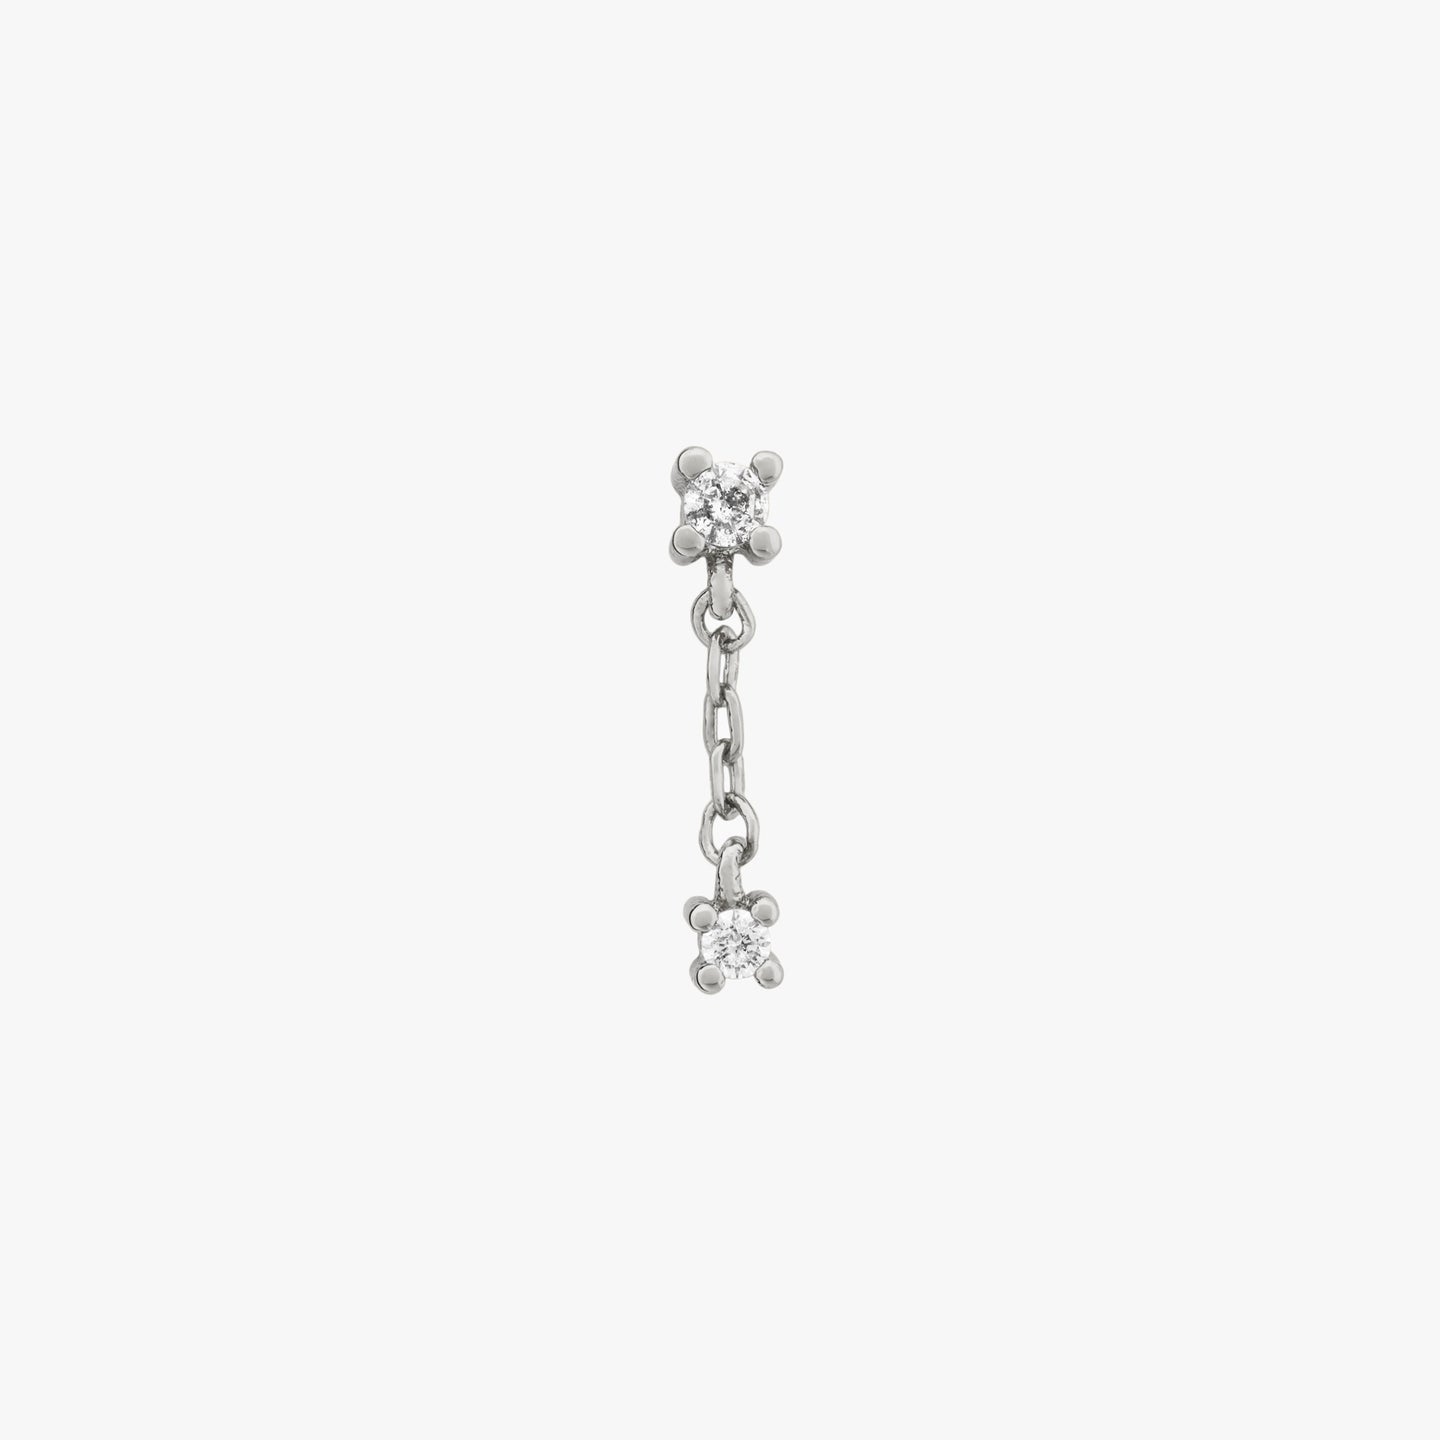 This is a pair of small cz studs with a dangling cz connected by a silver chain color:null|silver/clear